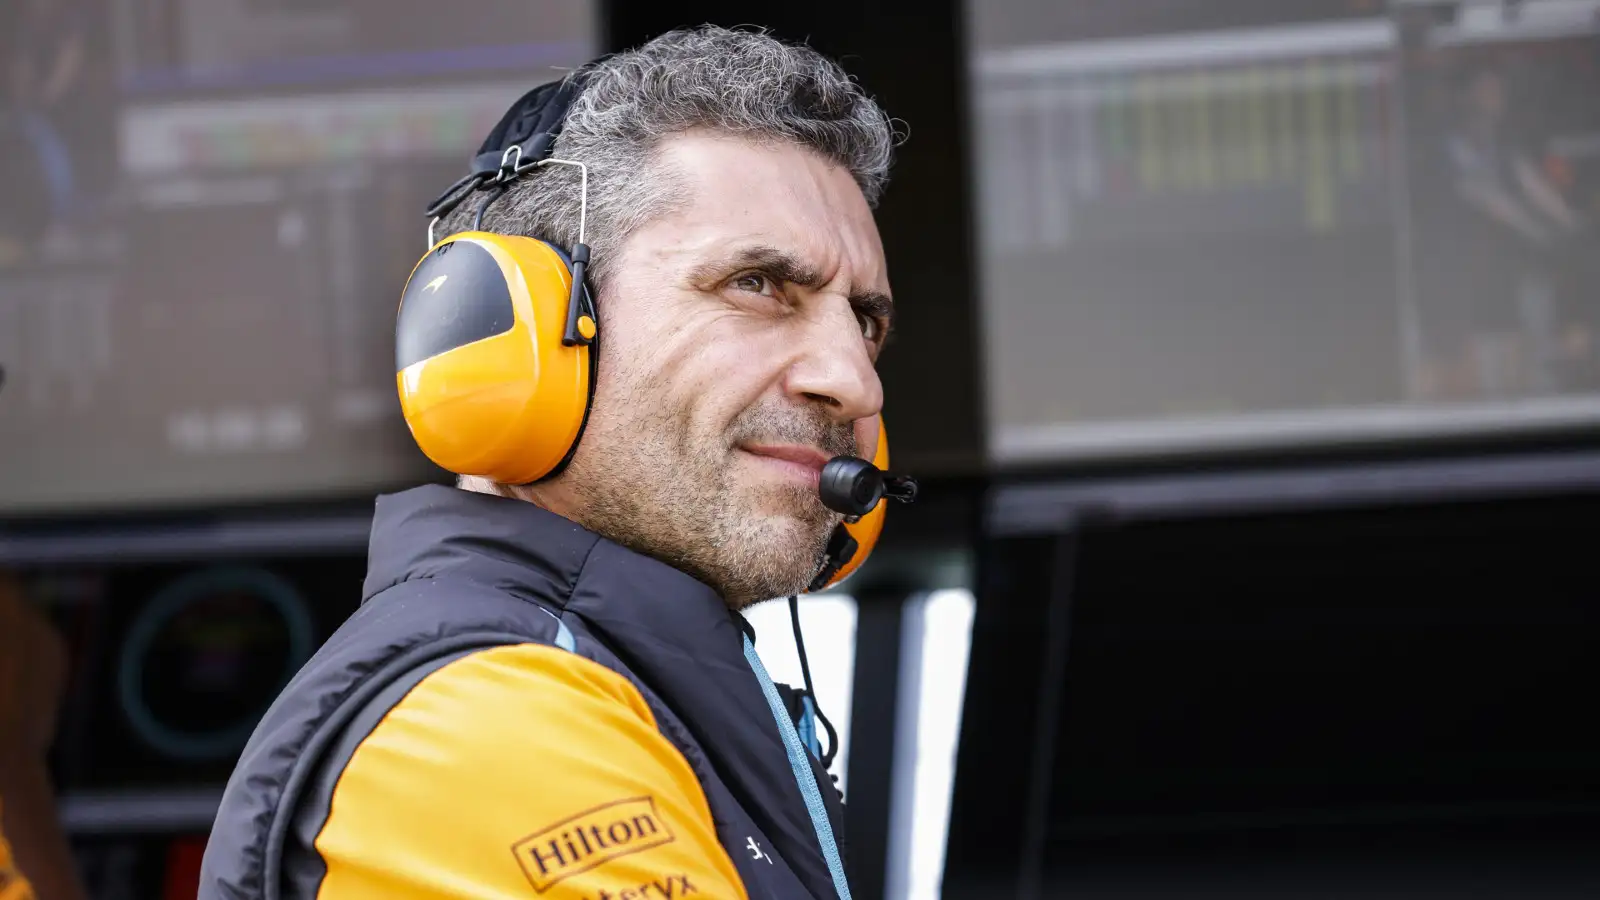 McLaren team boss Andrea Stella looks on from the pitwall at the 2023 British Grand Prix.